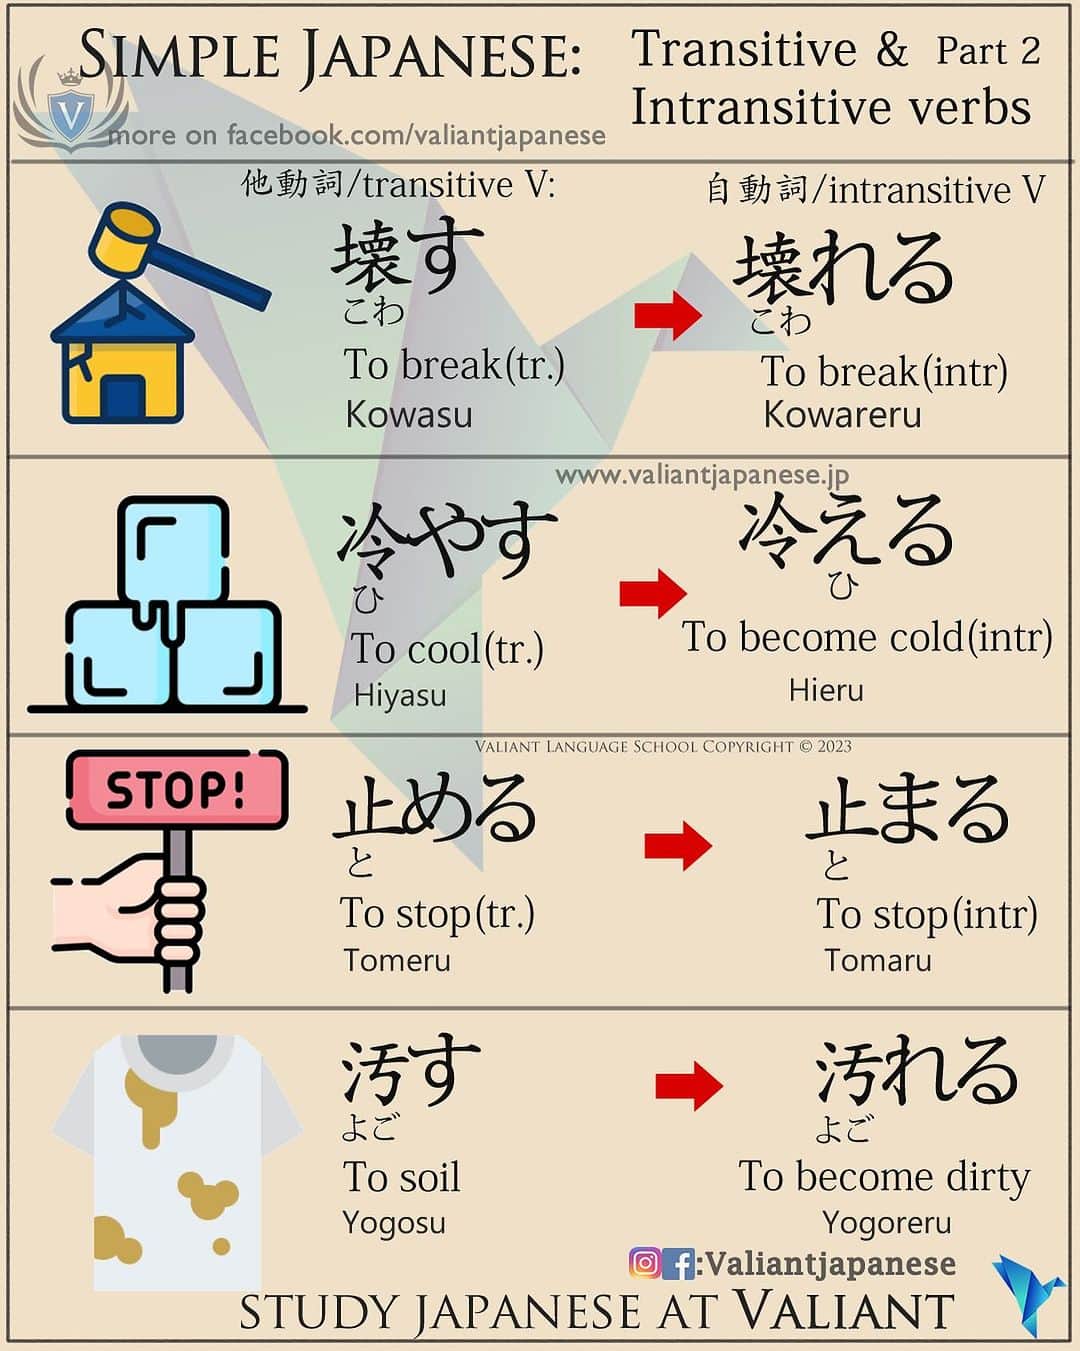 Valiant Language Schoolのインスタグラム：「👩‍🏫: Transitive and Intransitive Verb in Japanese  . .Details below 👇 In Japanese, transitive verbs can become intransitive verbs through various structural changes. One common way is by using the causative-passive form. Here’s a brief explanation with an example:  	1.	Transitive to Intransitive using Causative-Passive Form: 	•	To change a transitive verb into an intransitive verb, you can use the causative-passive form, which adds the sense of “making someone do something” and “having something done.” 	•	Example: 	•	Transitive Verb: “開ける” (akeru) - means “to open” (transitive) 	•	Causative-Passive Form: “開けさせられる” (akésaseraréru) - means “to be made to open” or “to be opened” (intransitive)  In this example, “開ける” is a transitive verb where someone is actively opening something, while “開けさせられる” is the causative-passive form, turning it into an intransitive verb, indicating that someone is made to open or that something is opened without a specified agent.  These structural changes are important in Japanese grammar and can help you express different nuances and actions in sentences. . .  #japaneselanguage  #sushilovers  #nihongojapanese  #日本語  #hiragana  #katakana #일본어  #studyjapanese   #japaneseramen  #giappone  #picoftheday  #4chan  #感情」